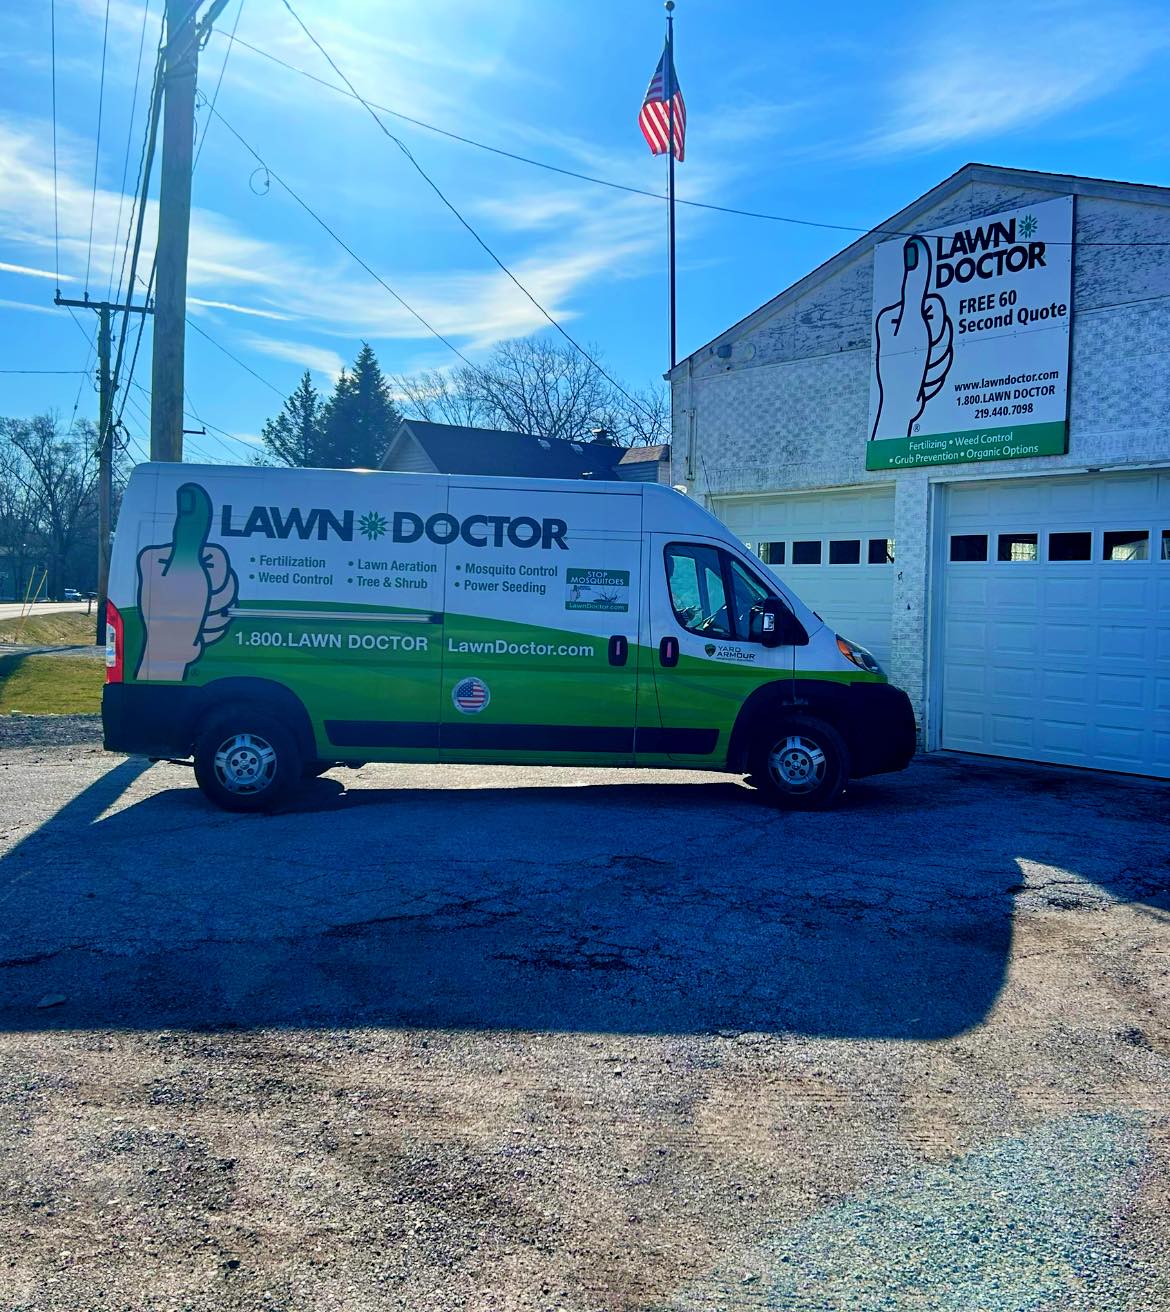 Lawn Doctor of West Lake County 1103 E Hwy 330, Griffith Indiana 46319